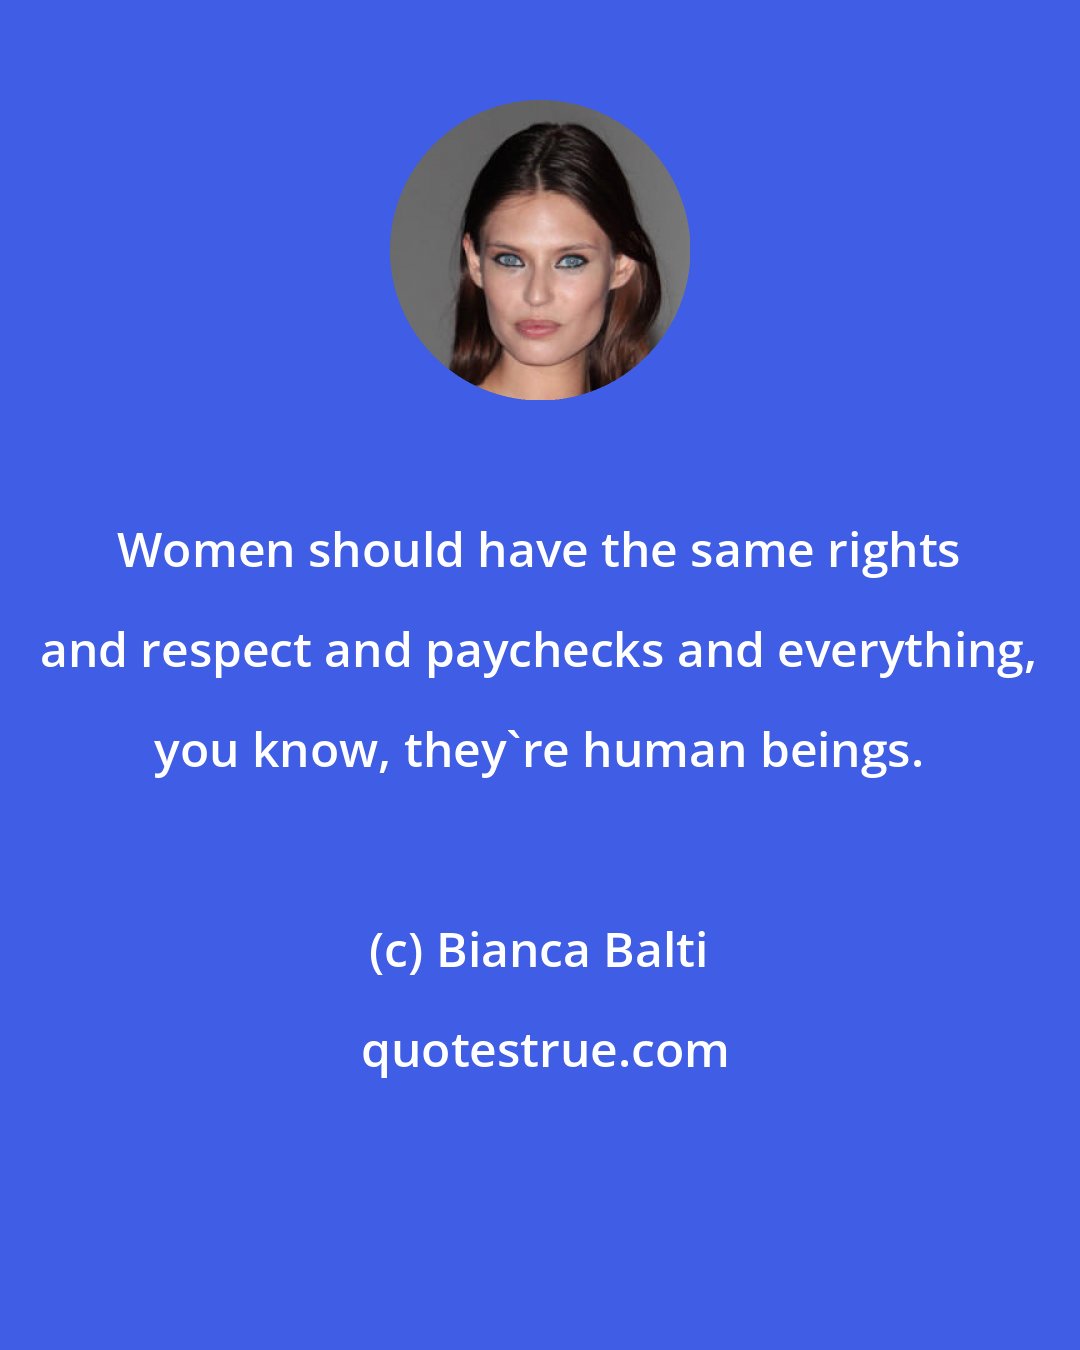 Bianca Balti: Women should have the same rights and respect and paychecks and everything, you know, they're human beings.